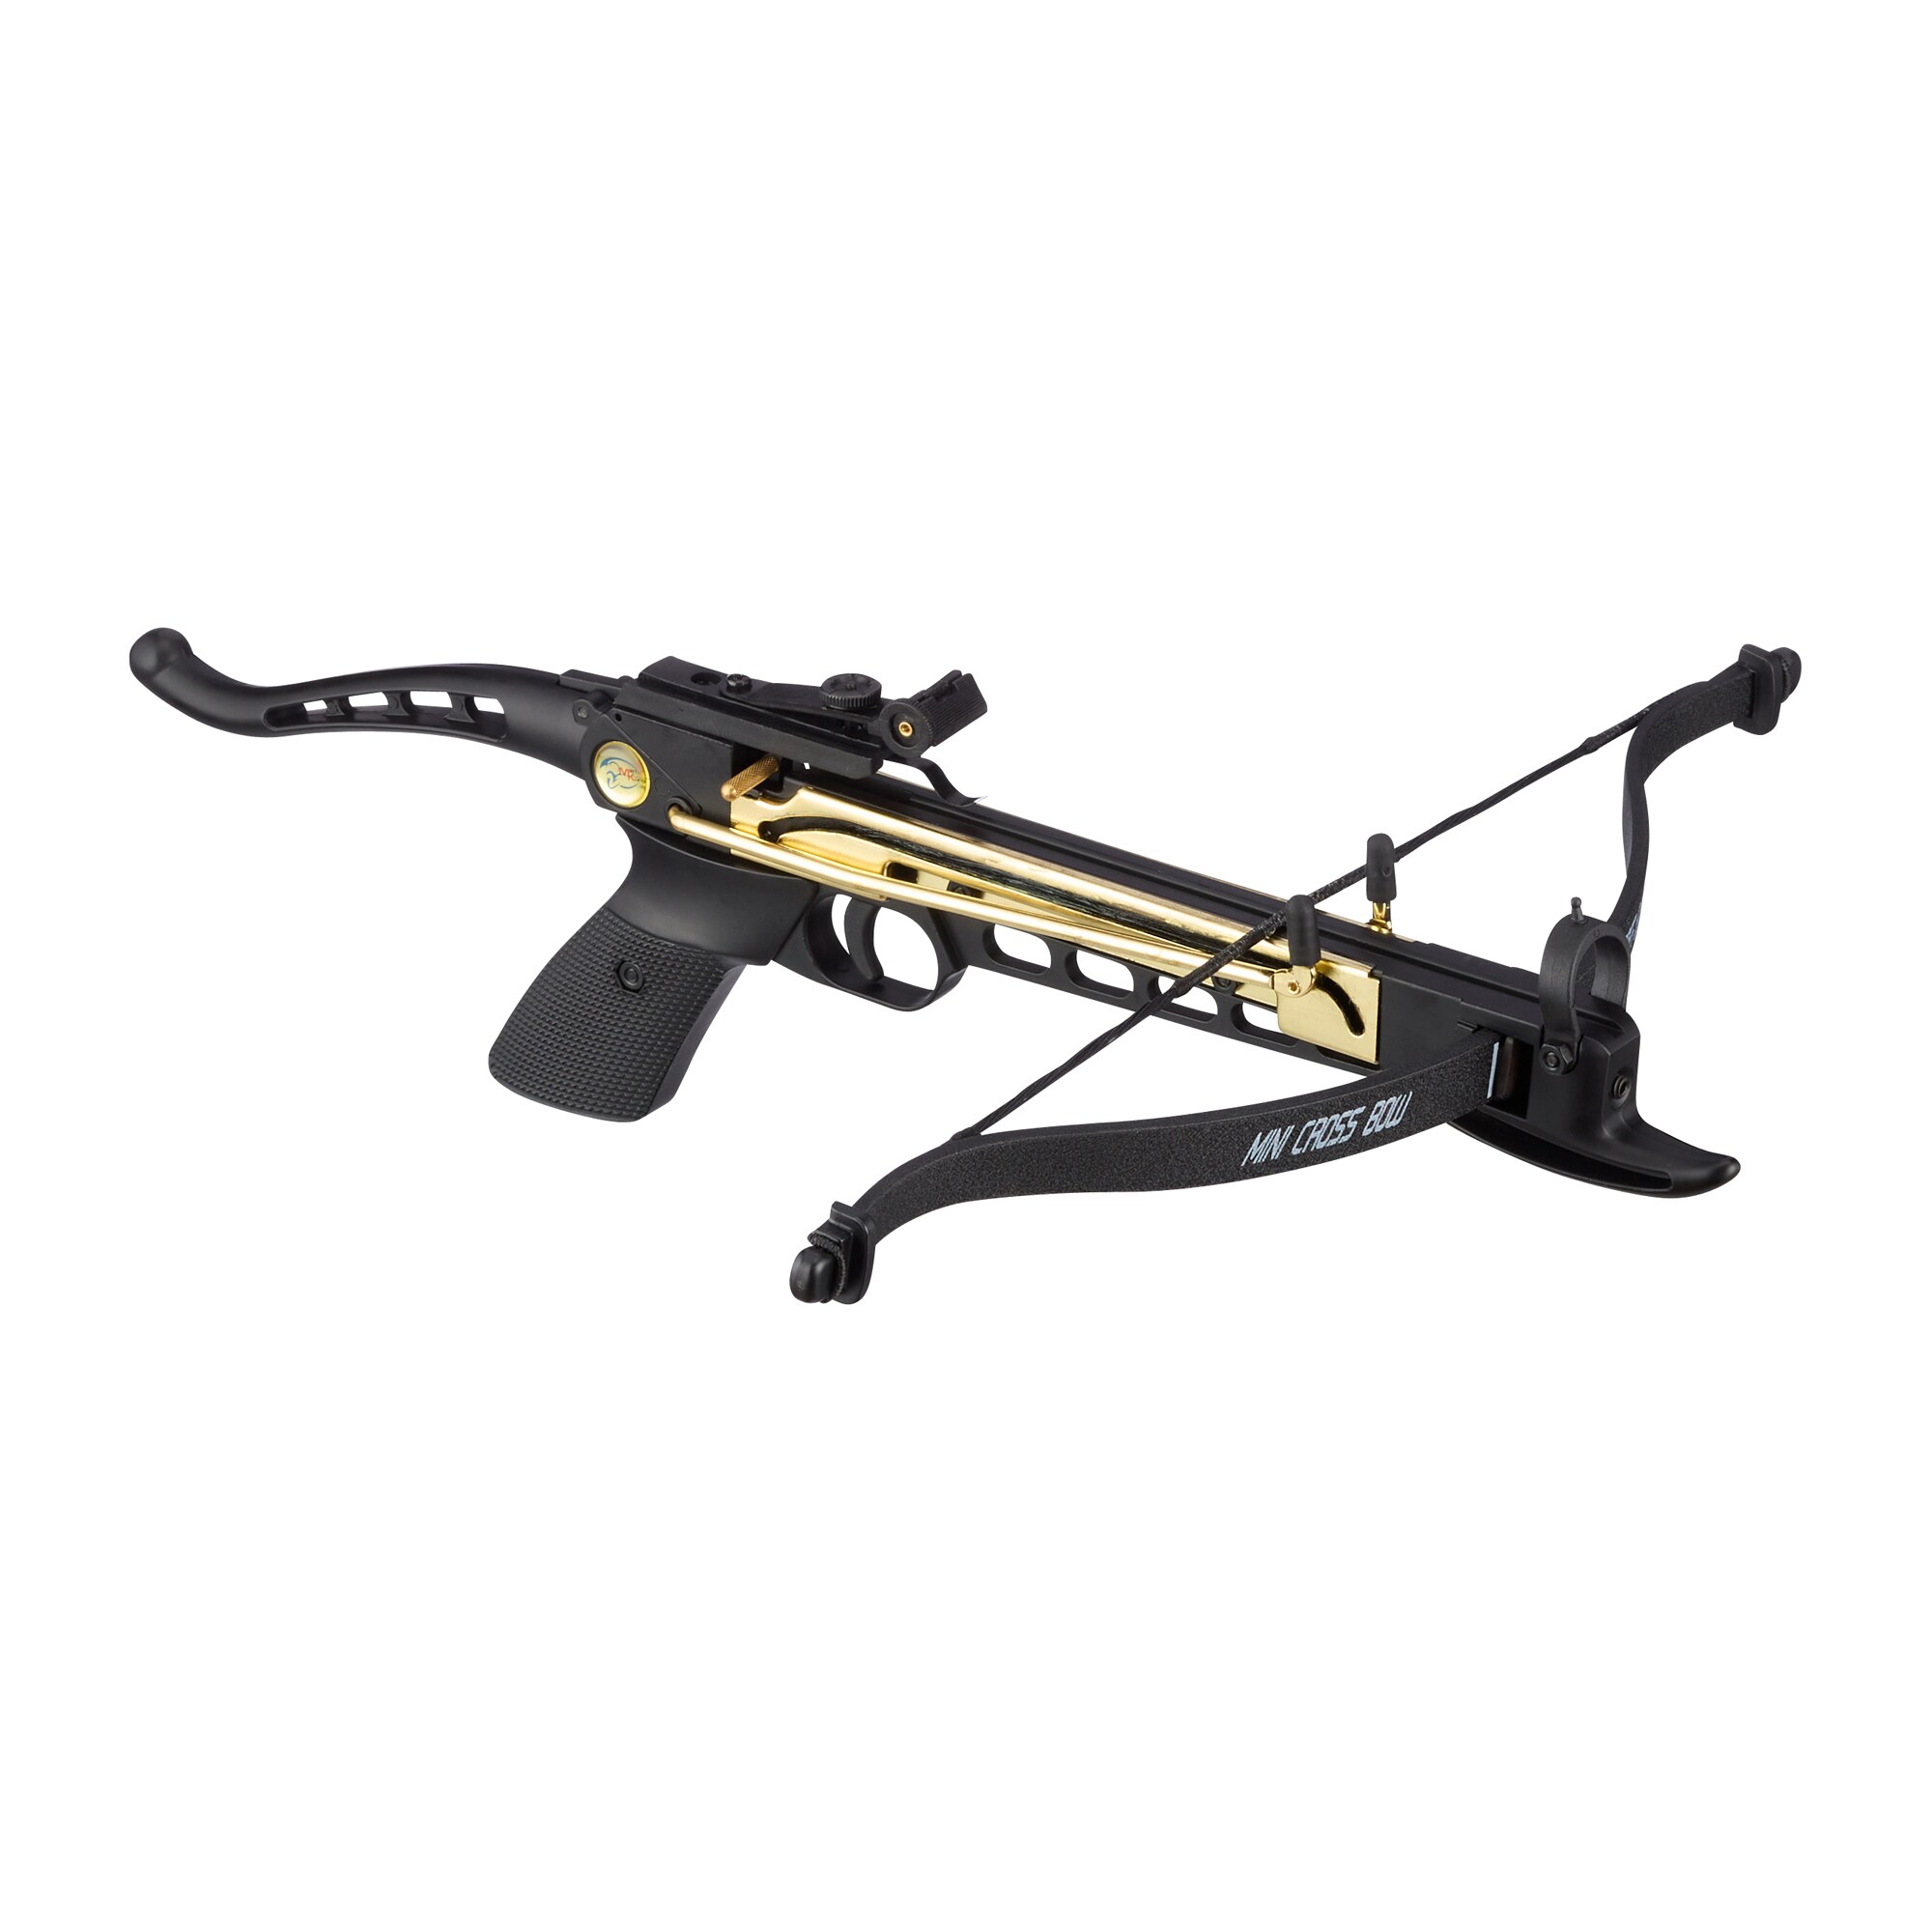 Purchase the Cobra Pistol Crossbow Recurve System 80 lbs by ASMC